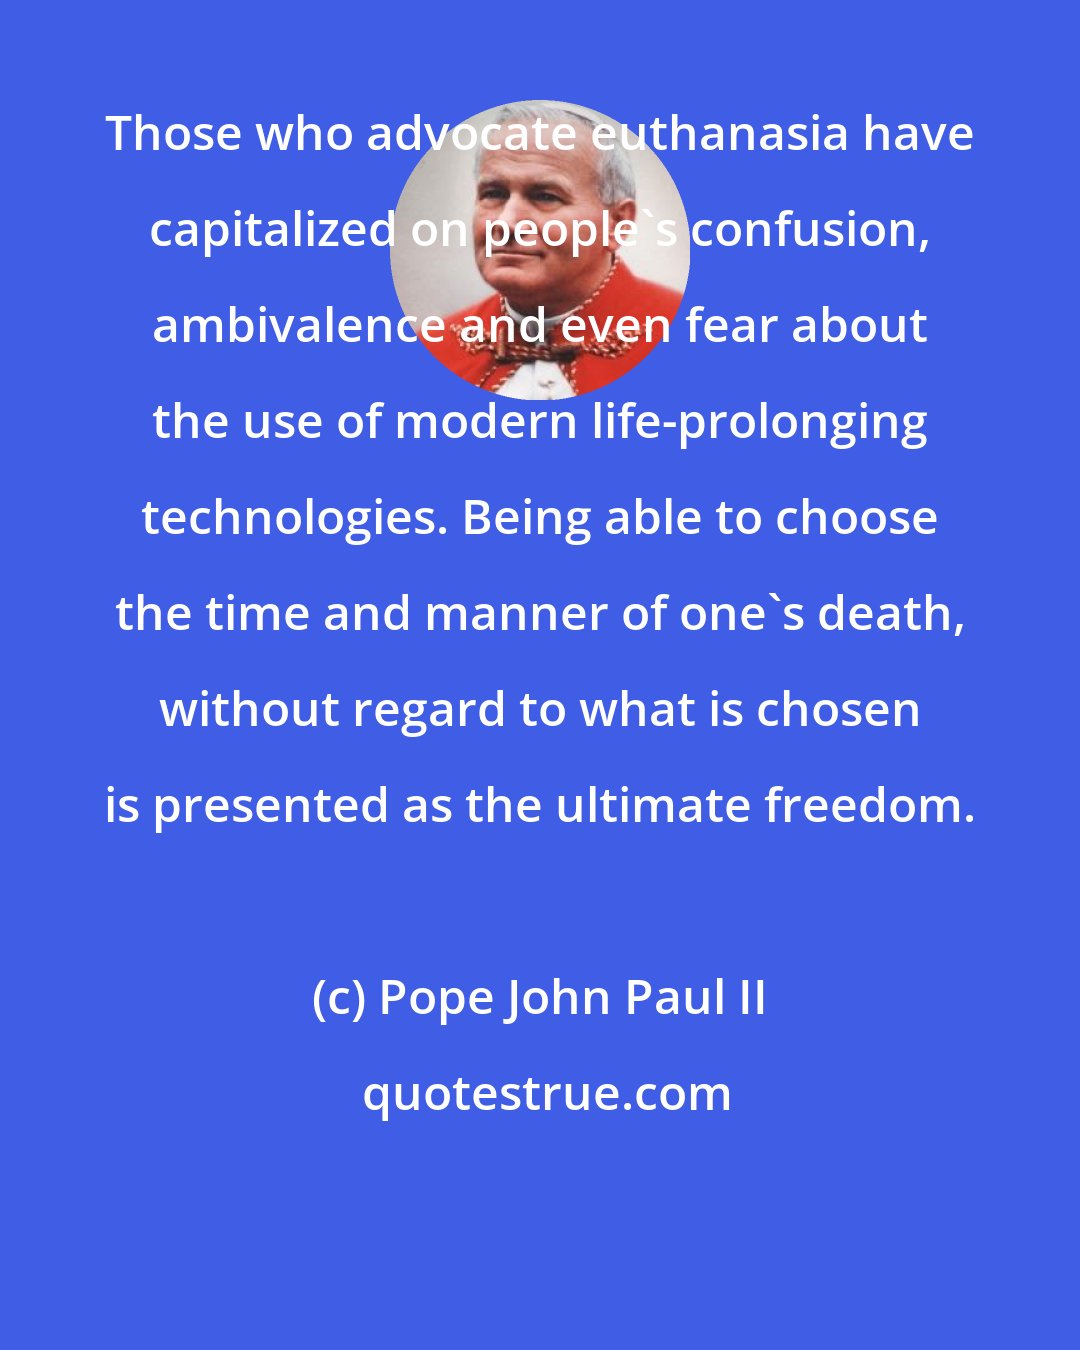 Pope John Paul II: Those who advocate euthanasia have capitalized on people's confusion, ambivalence and even fear about the use of modern life-prolonging technologies. Being able to choose the time and manner of one's death, without regard to what is chosen is presented as the ultimate freedom.